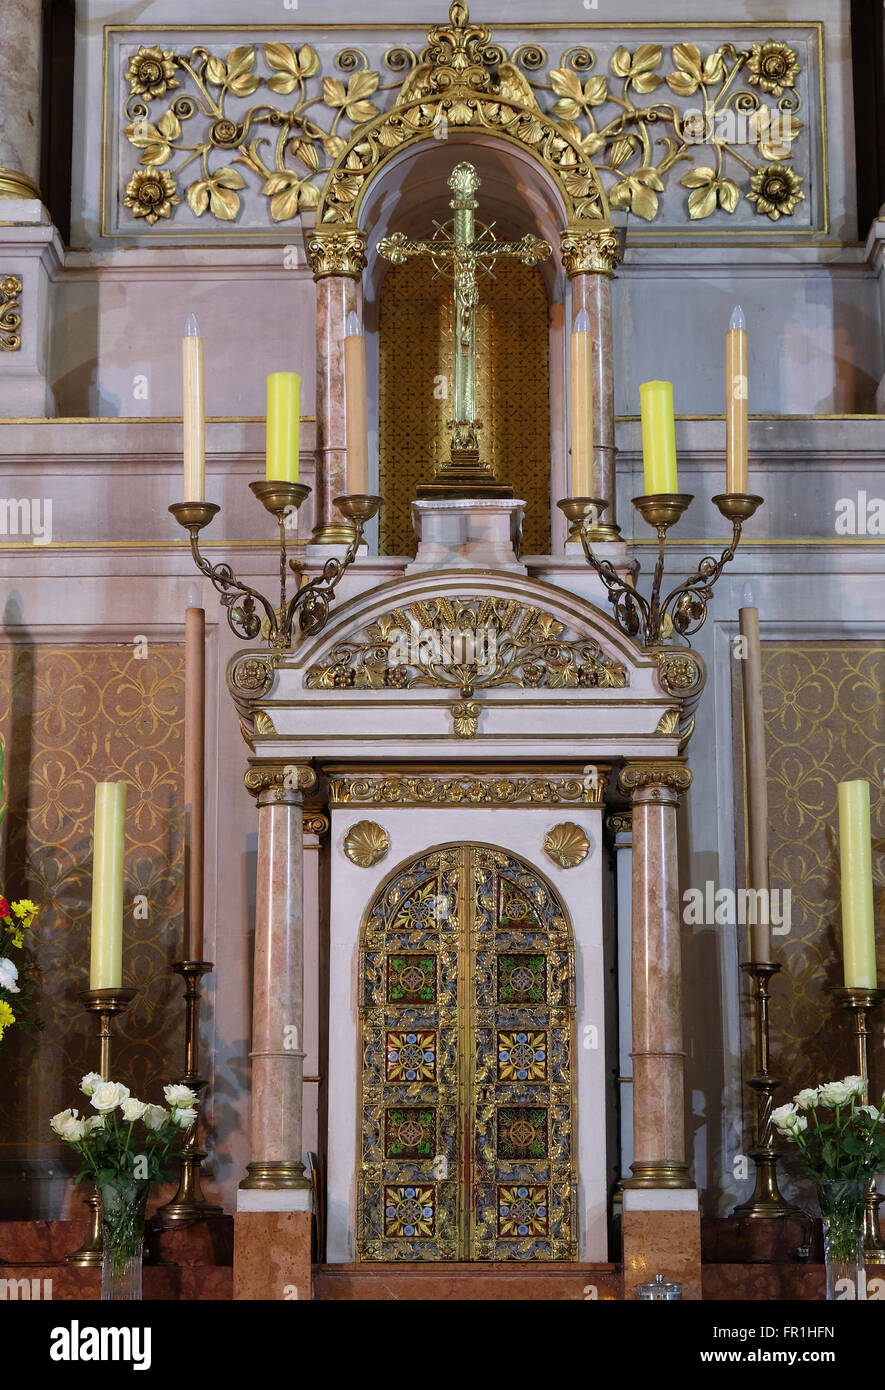 Tabernacle on the main altar in Basilica of the Sacred Heart of Jesus in Zagreb, Croatia Stock Photo